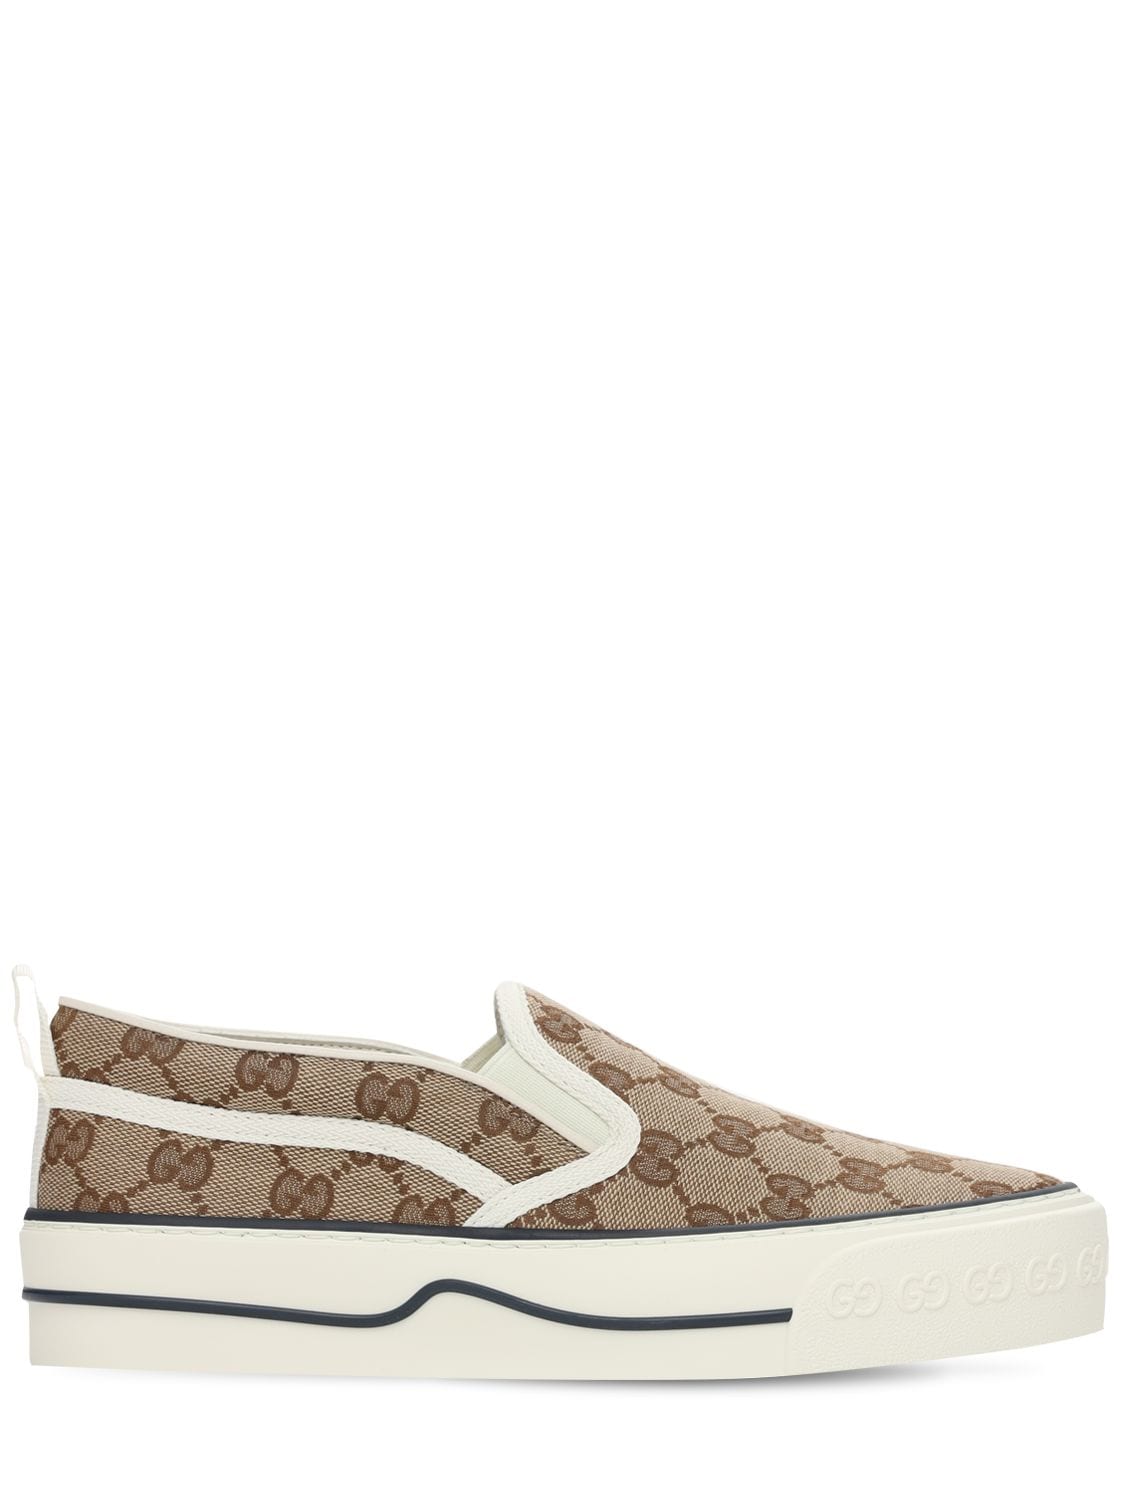 GUCCI 20mm Gucci Tennis 1977 Slip-on Sneakers